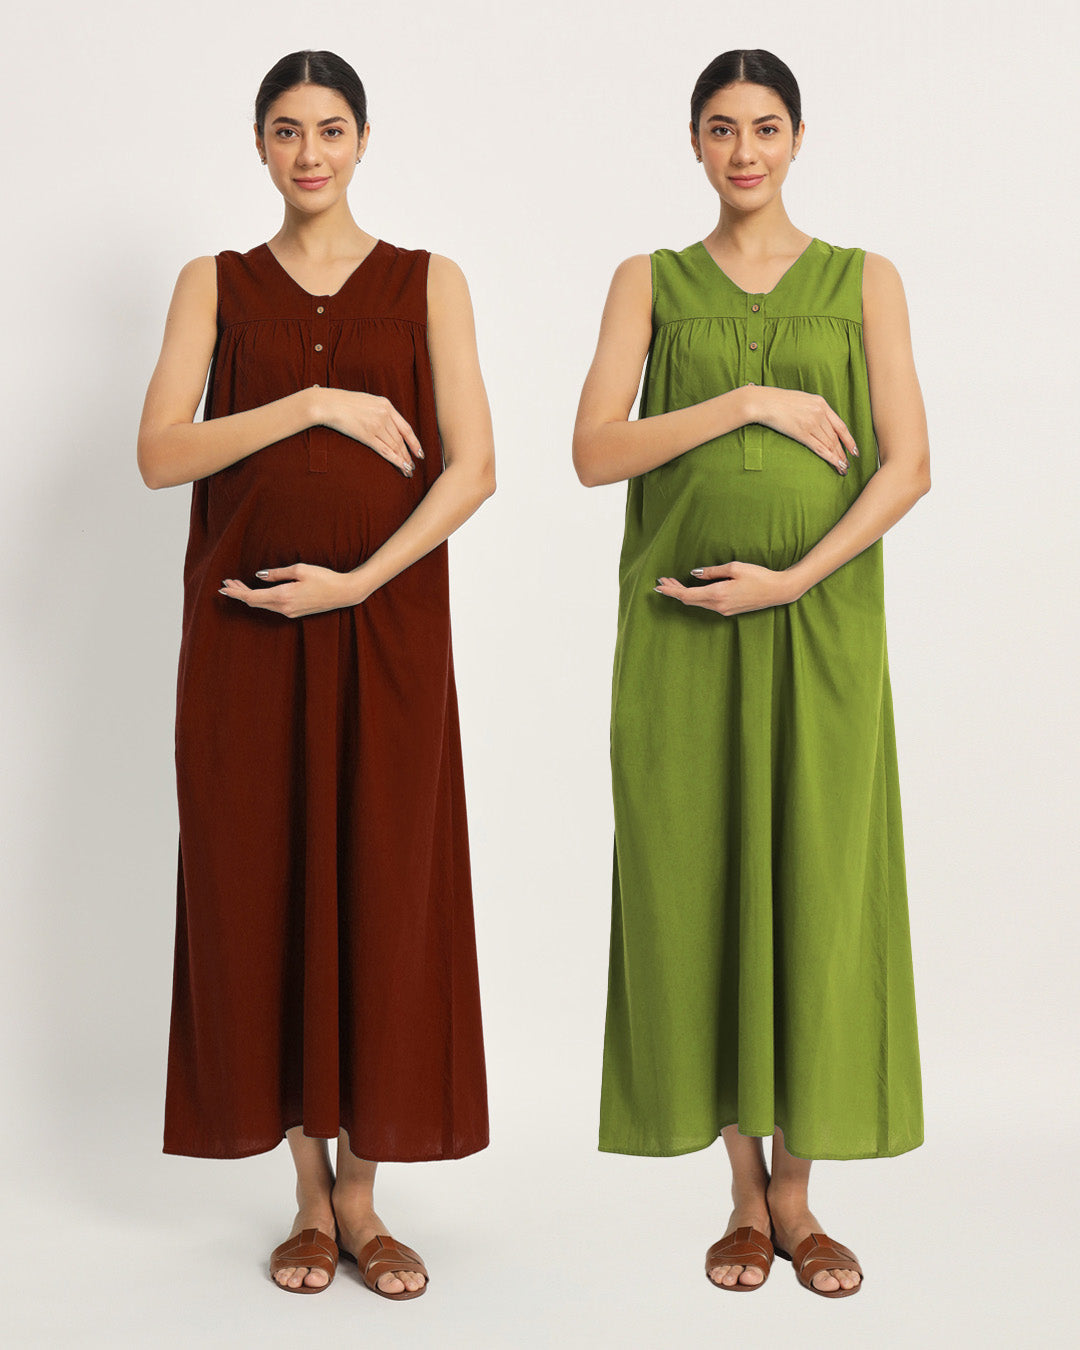 Combo: Russet Red & Sage Green Mommylicious Maternity & Nursing Dress